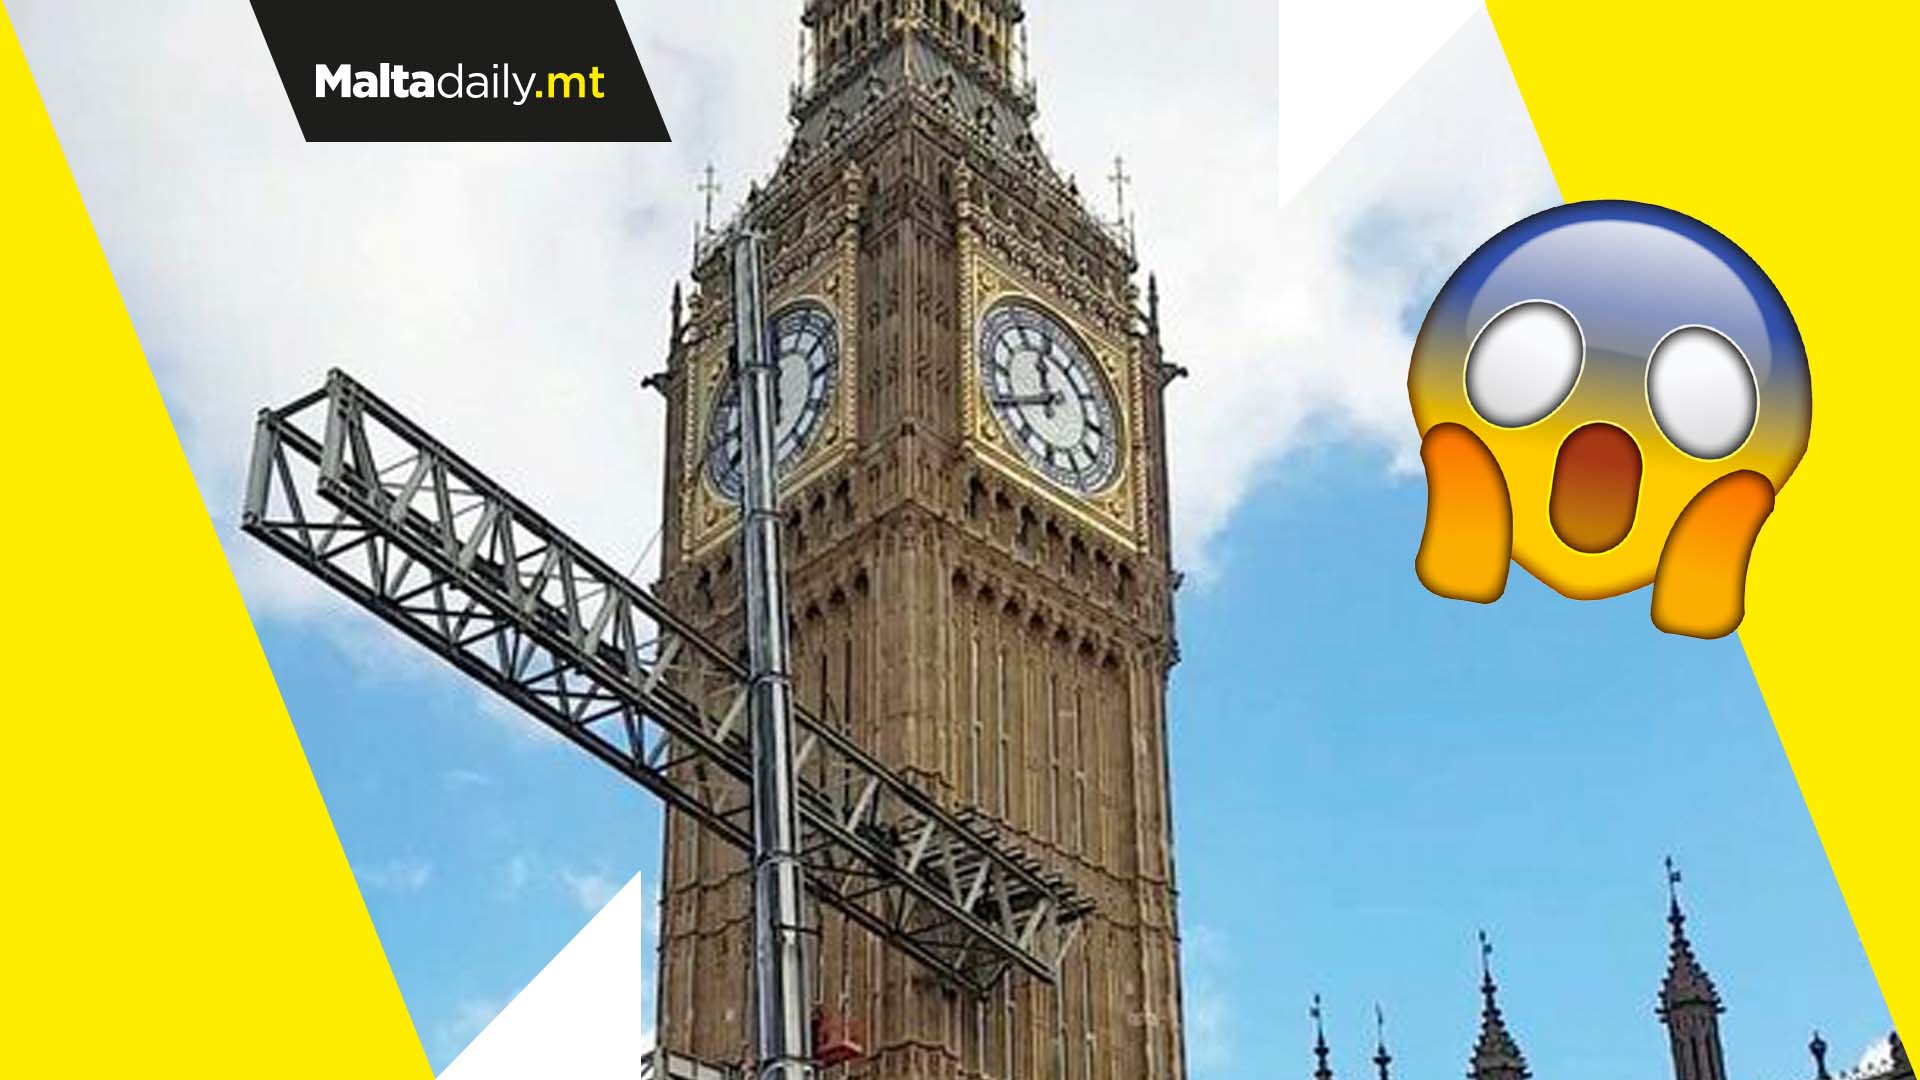 Scaffolding smashes into Big Ben days after £80 million makeover